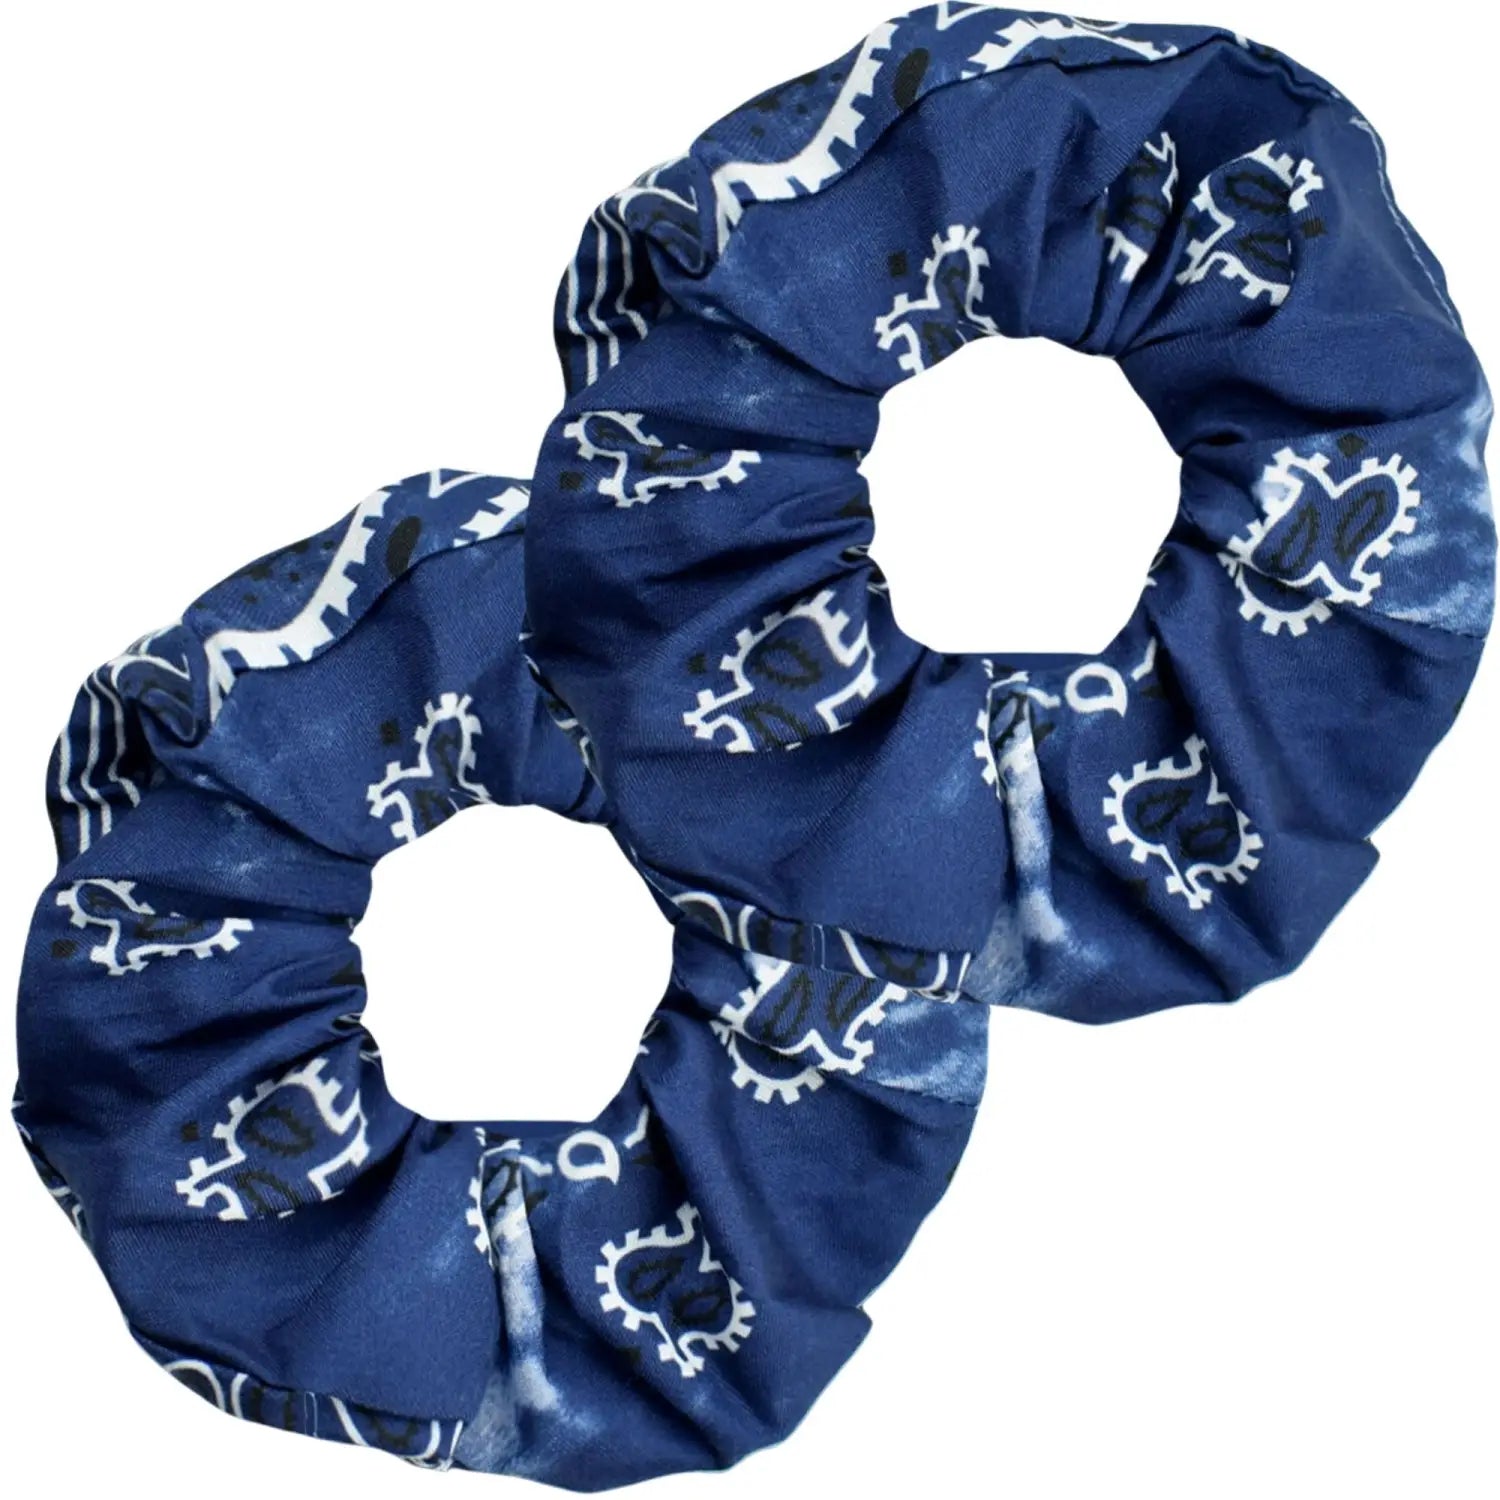 A close-up of a single dark navy blue scrunchie with white paisley patterns